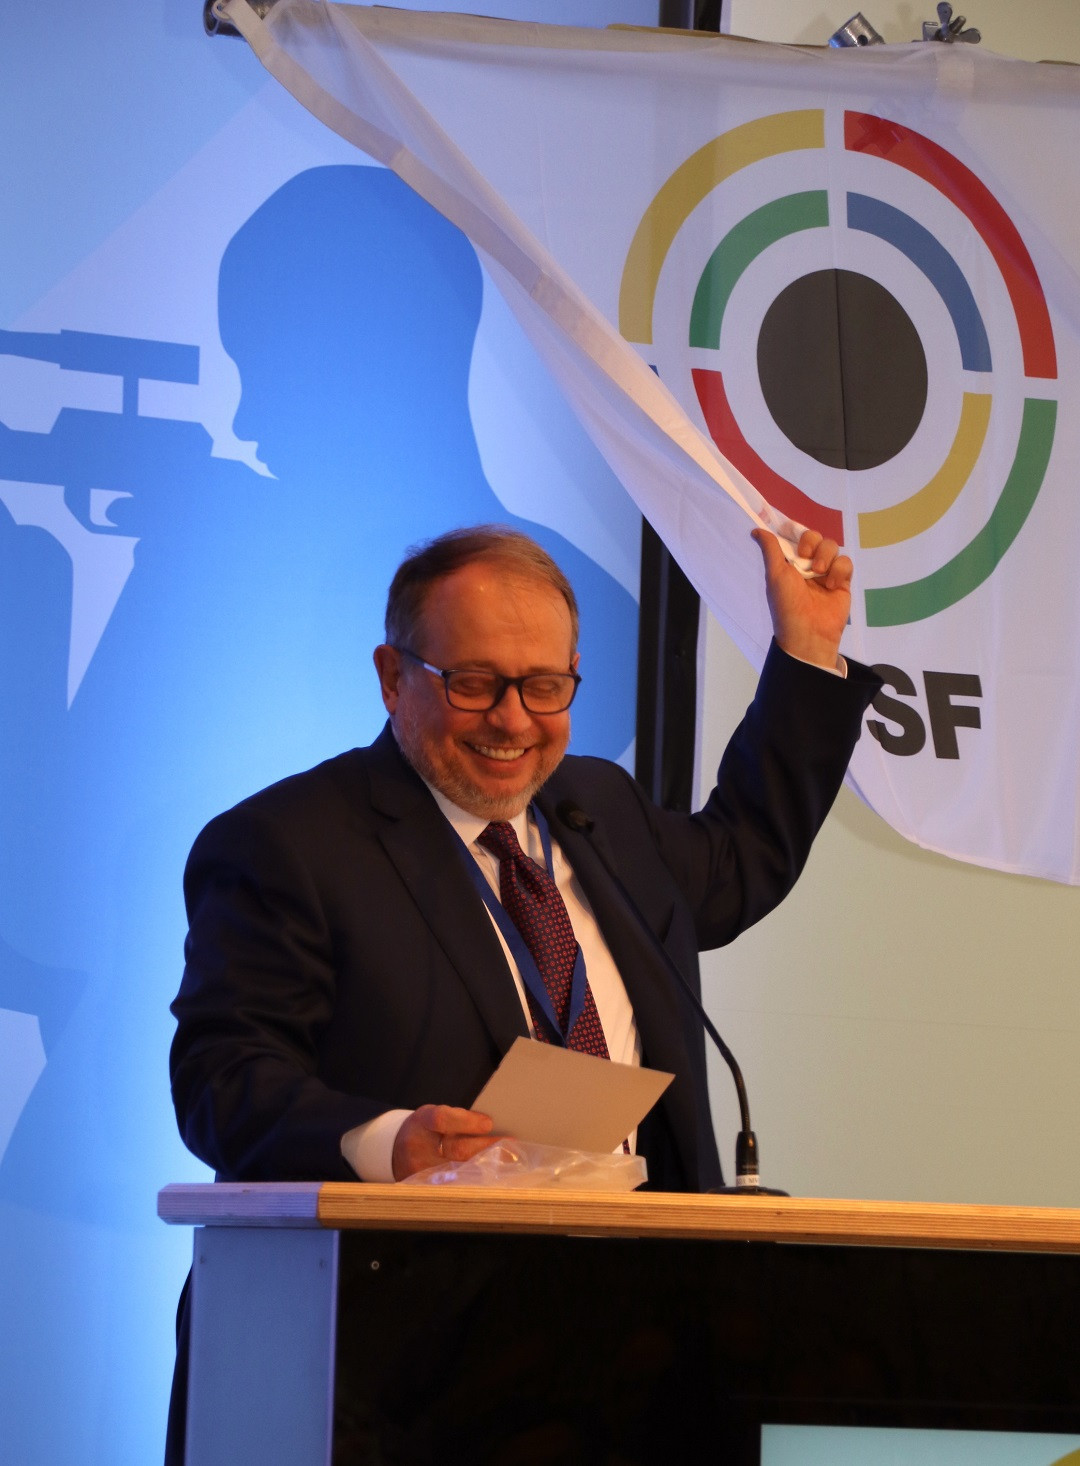 Vladimir Lisin was elected ISSF President four years ago, pipping Luciano Rossi by just four votes after a bitter campaign ©ISSF